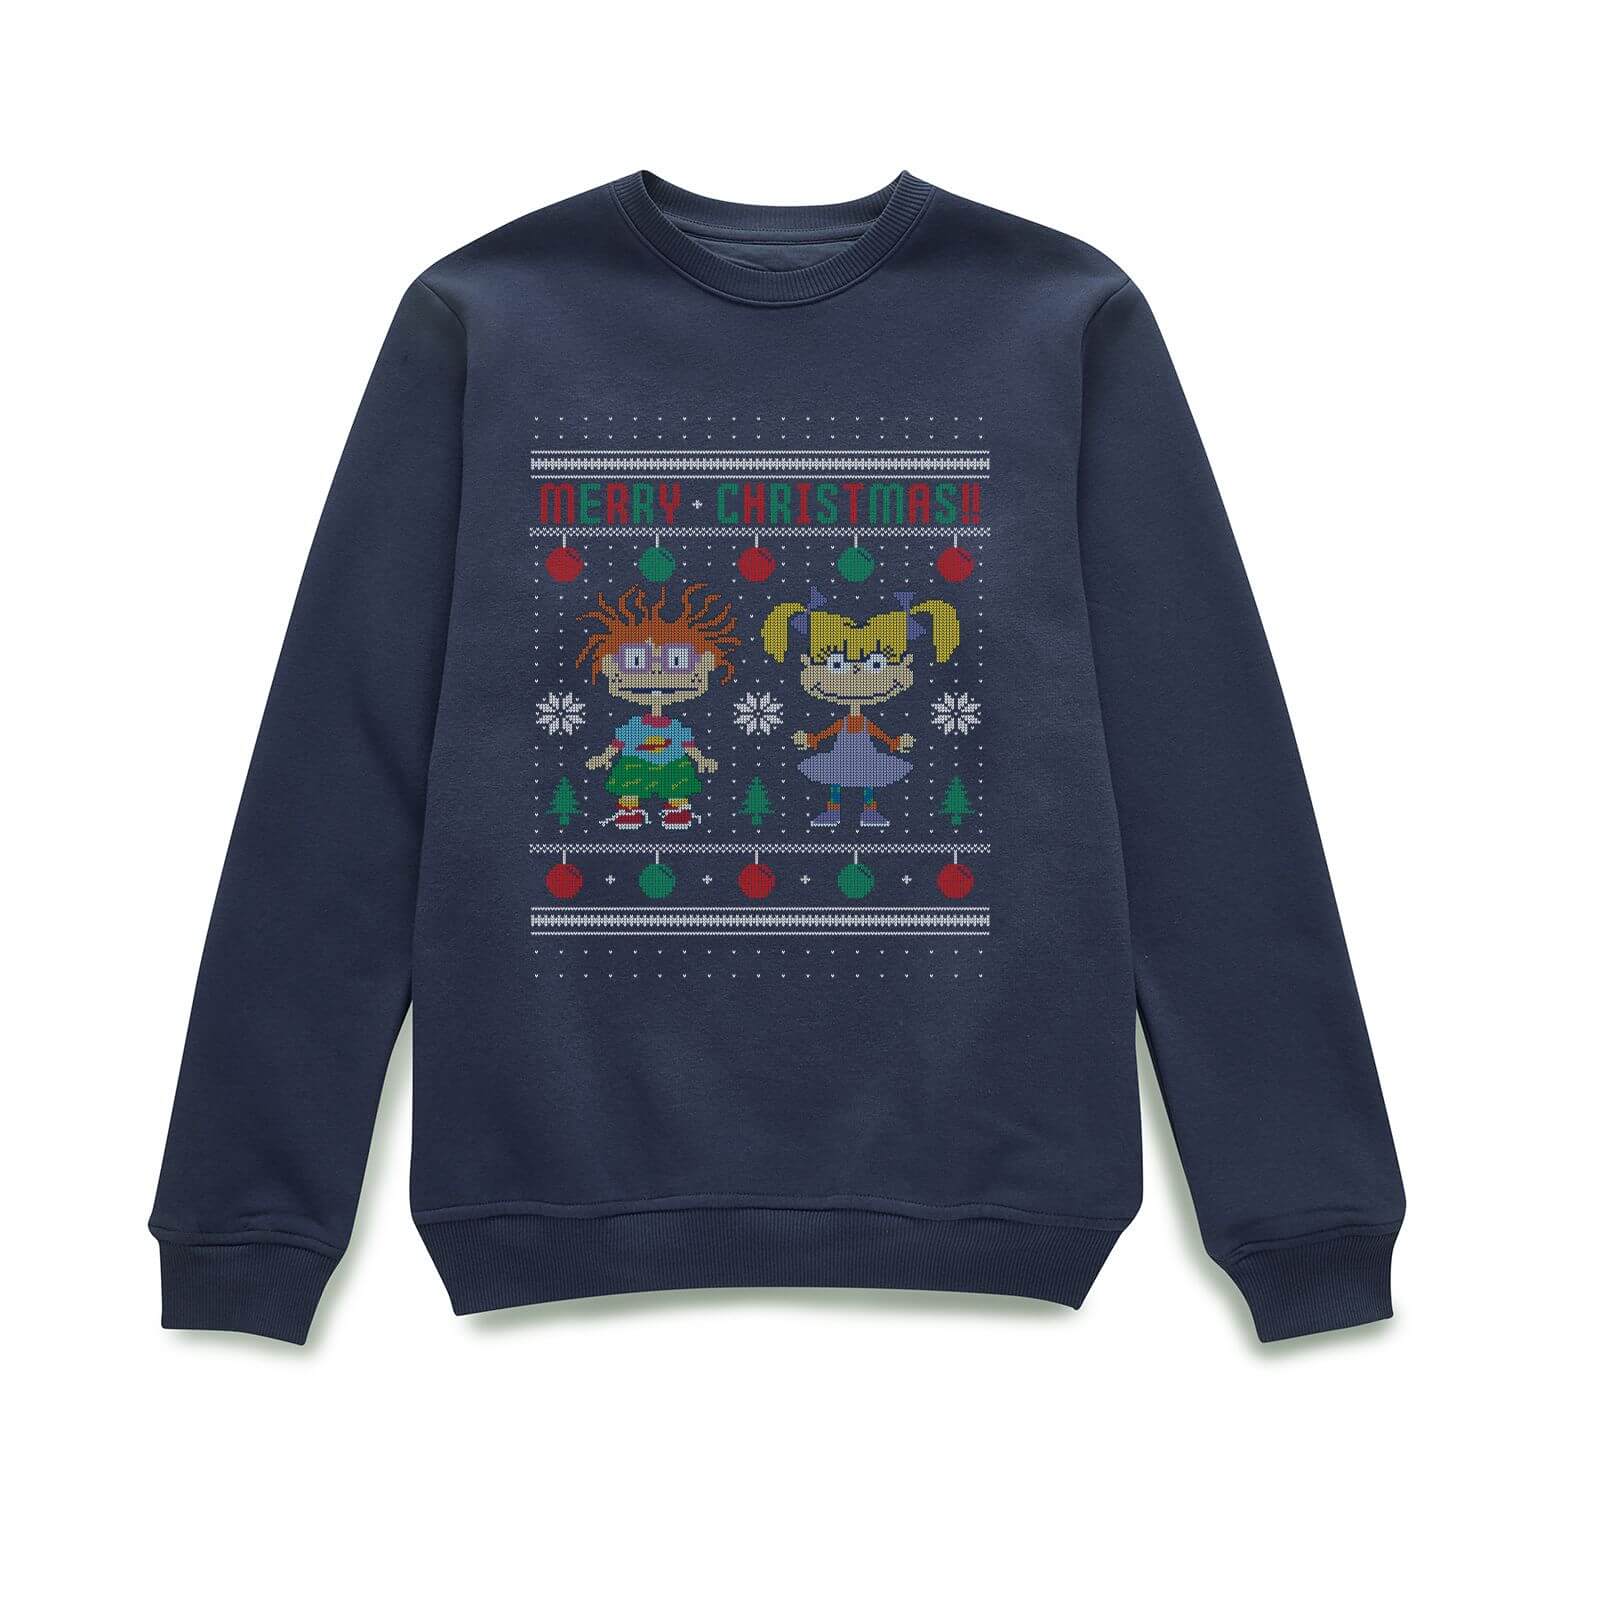 Rugrats Chuckie And Angelica - Merry Christmas Christmas Jumper - Navy - S - Navy